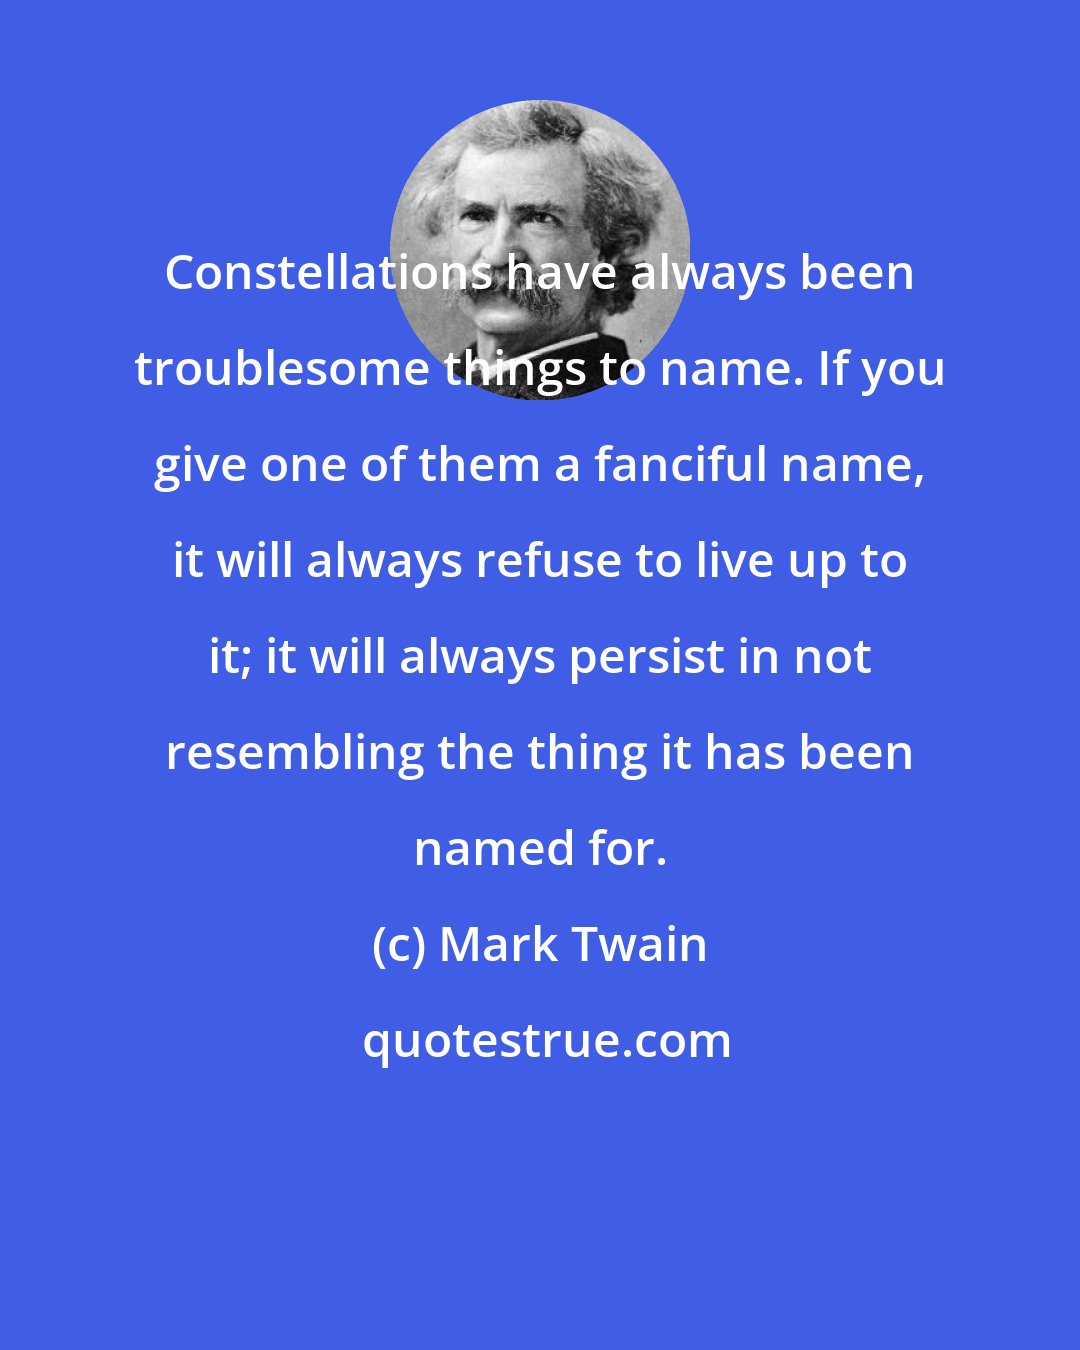 Mark Twain: Constellations have always been troublesome things to name. If you give one of them a fanciful name, it will always refuse to live up to it; it will always persist in not resembling the thing it has been named for.